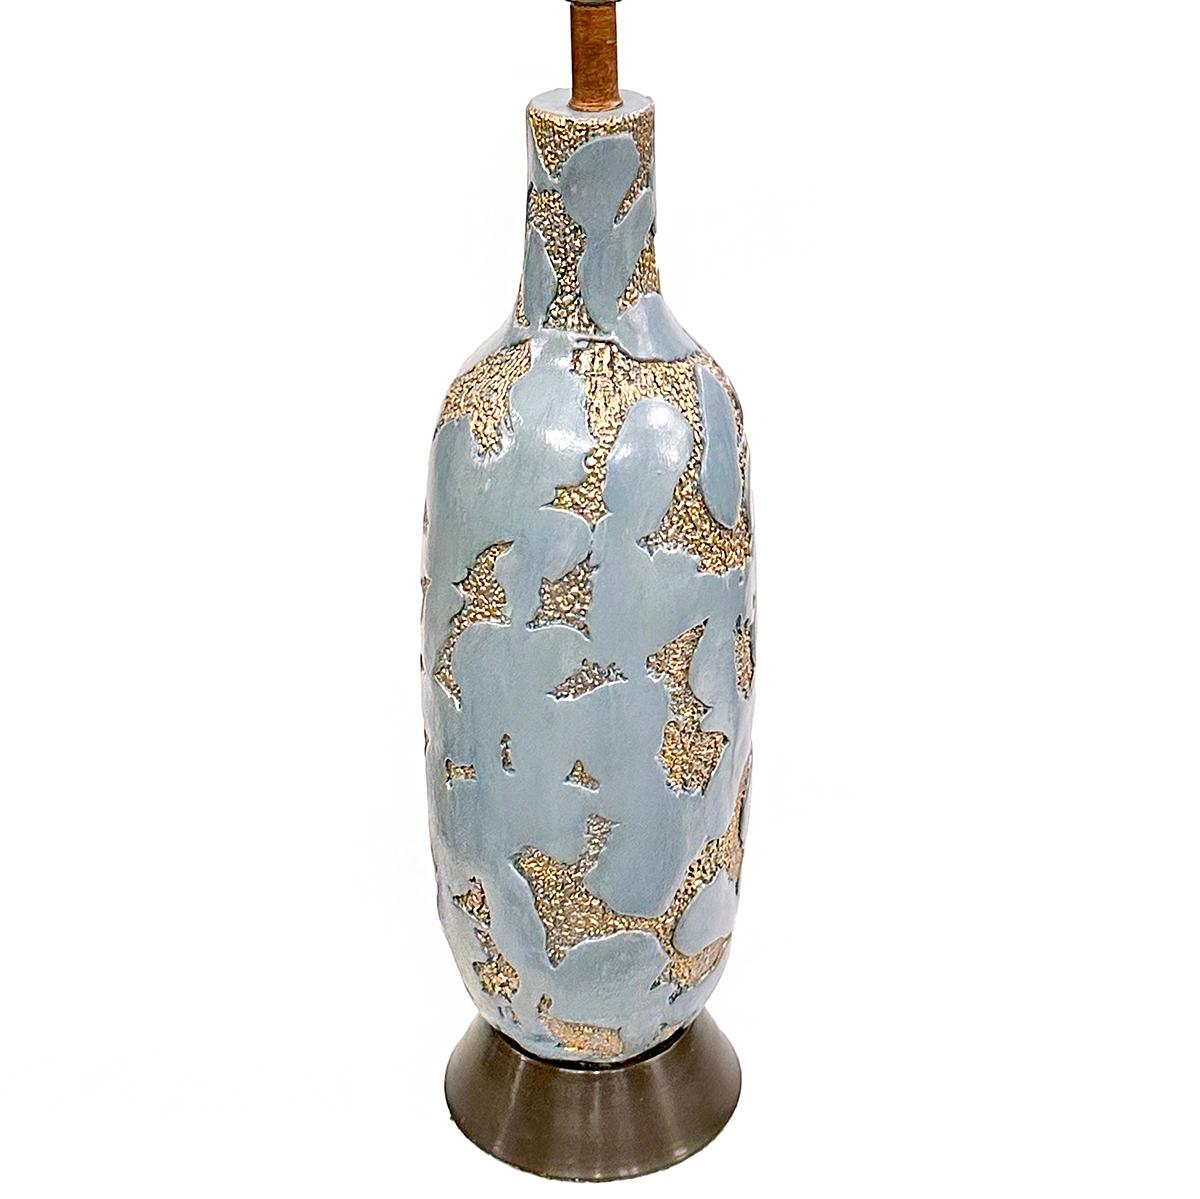 A circa 1960's Italian celadon color lamp with gilt details.

Measurements:
Height of body: 23